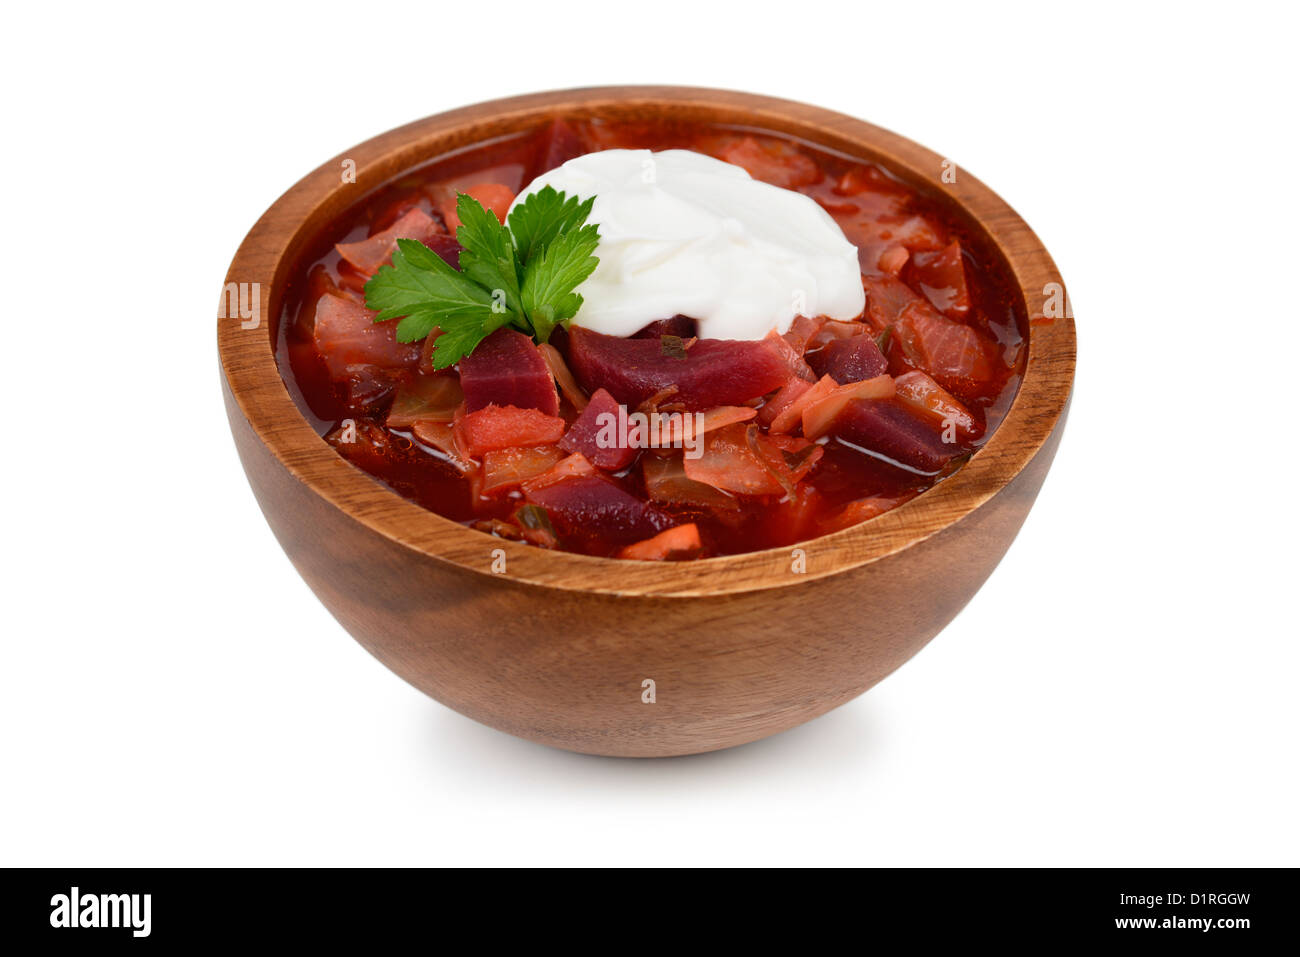 Borscht, Russian traditional Beetroot Soup, Stew Stock Photo